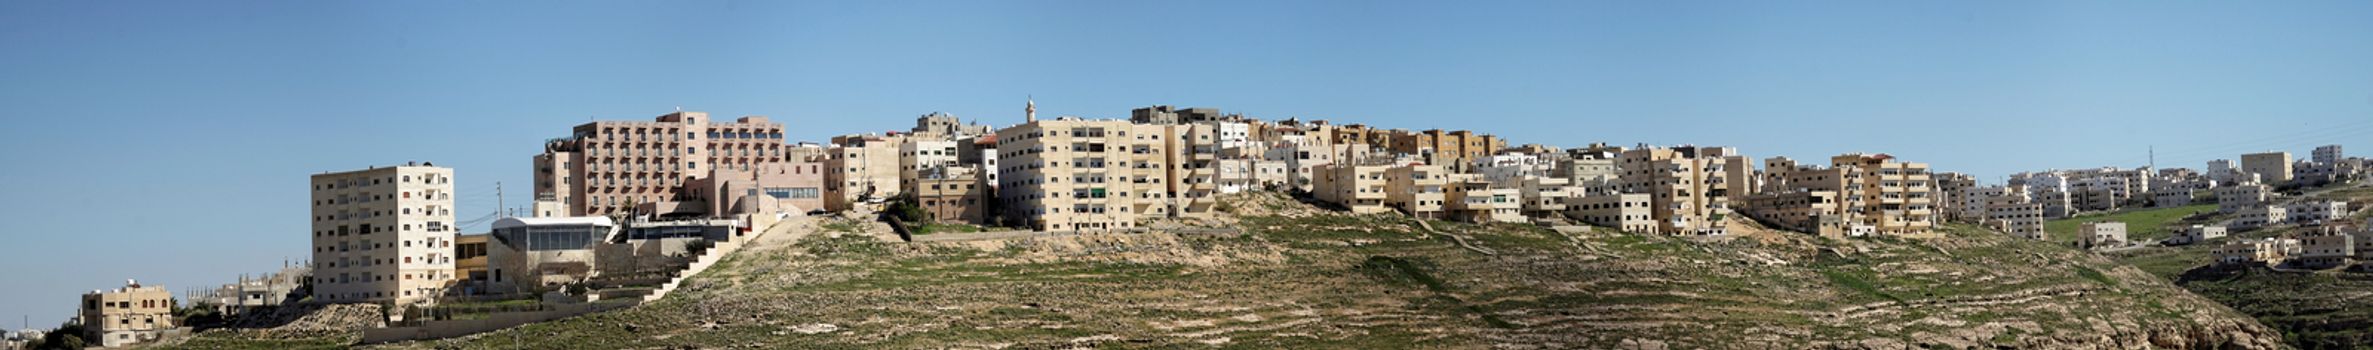 Composite high-resolution panorama of the high-rise housing estate on the outskirts of the city of Karak in Jordan., middle east